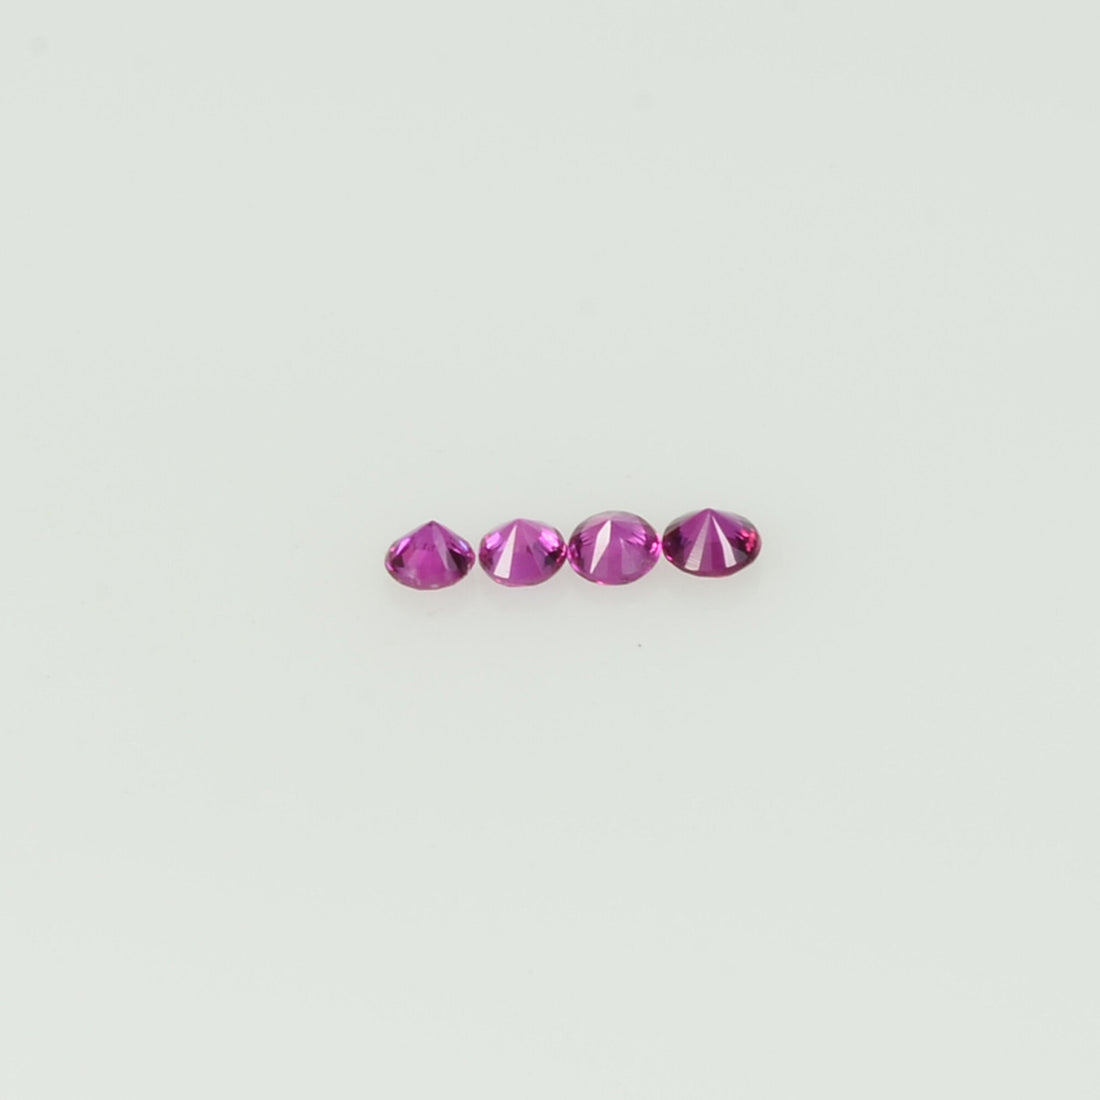 1.4-1.7 mm Natural Pink Sapphire Loose Gemstone Round Diamond Cut Cleanish Quality AAA+ Color